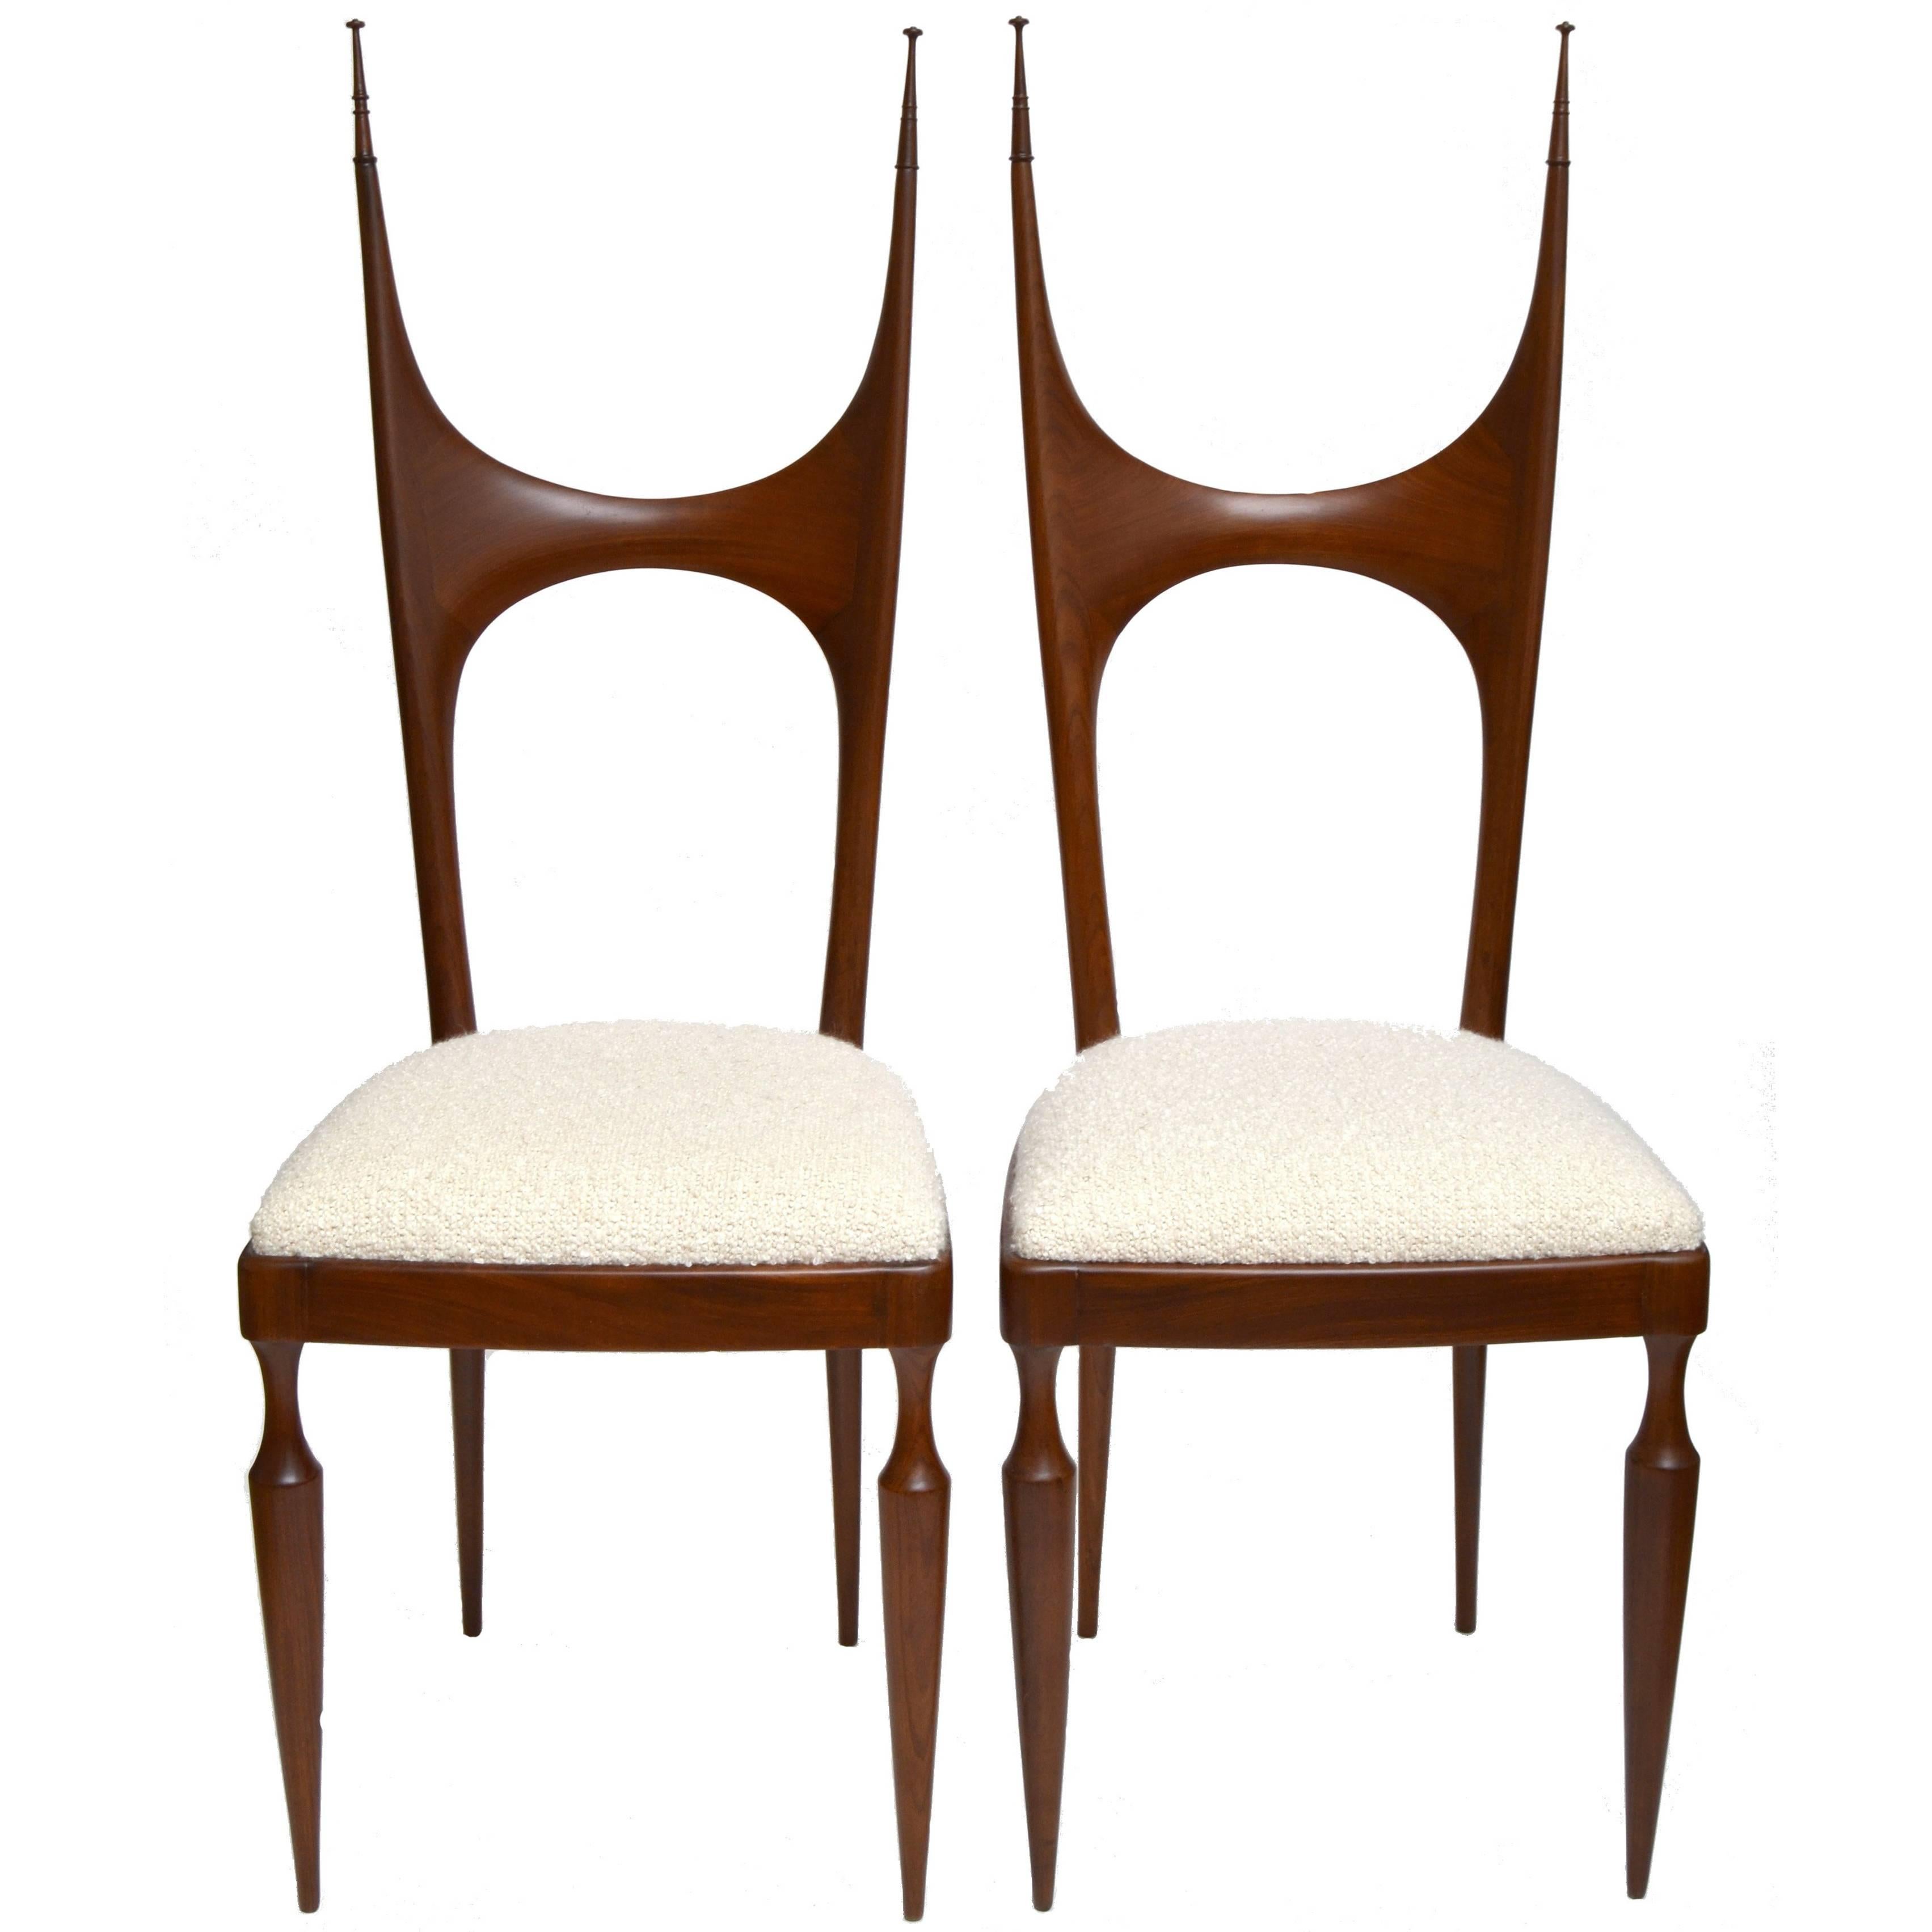 Pozzi and Verga Sculptural Wooden Chairs, Italy, 1950, Pair